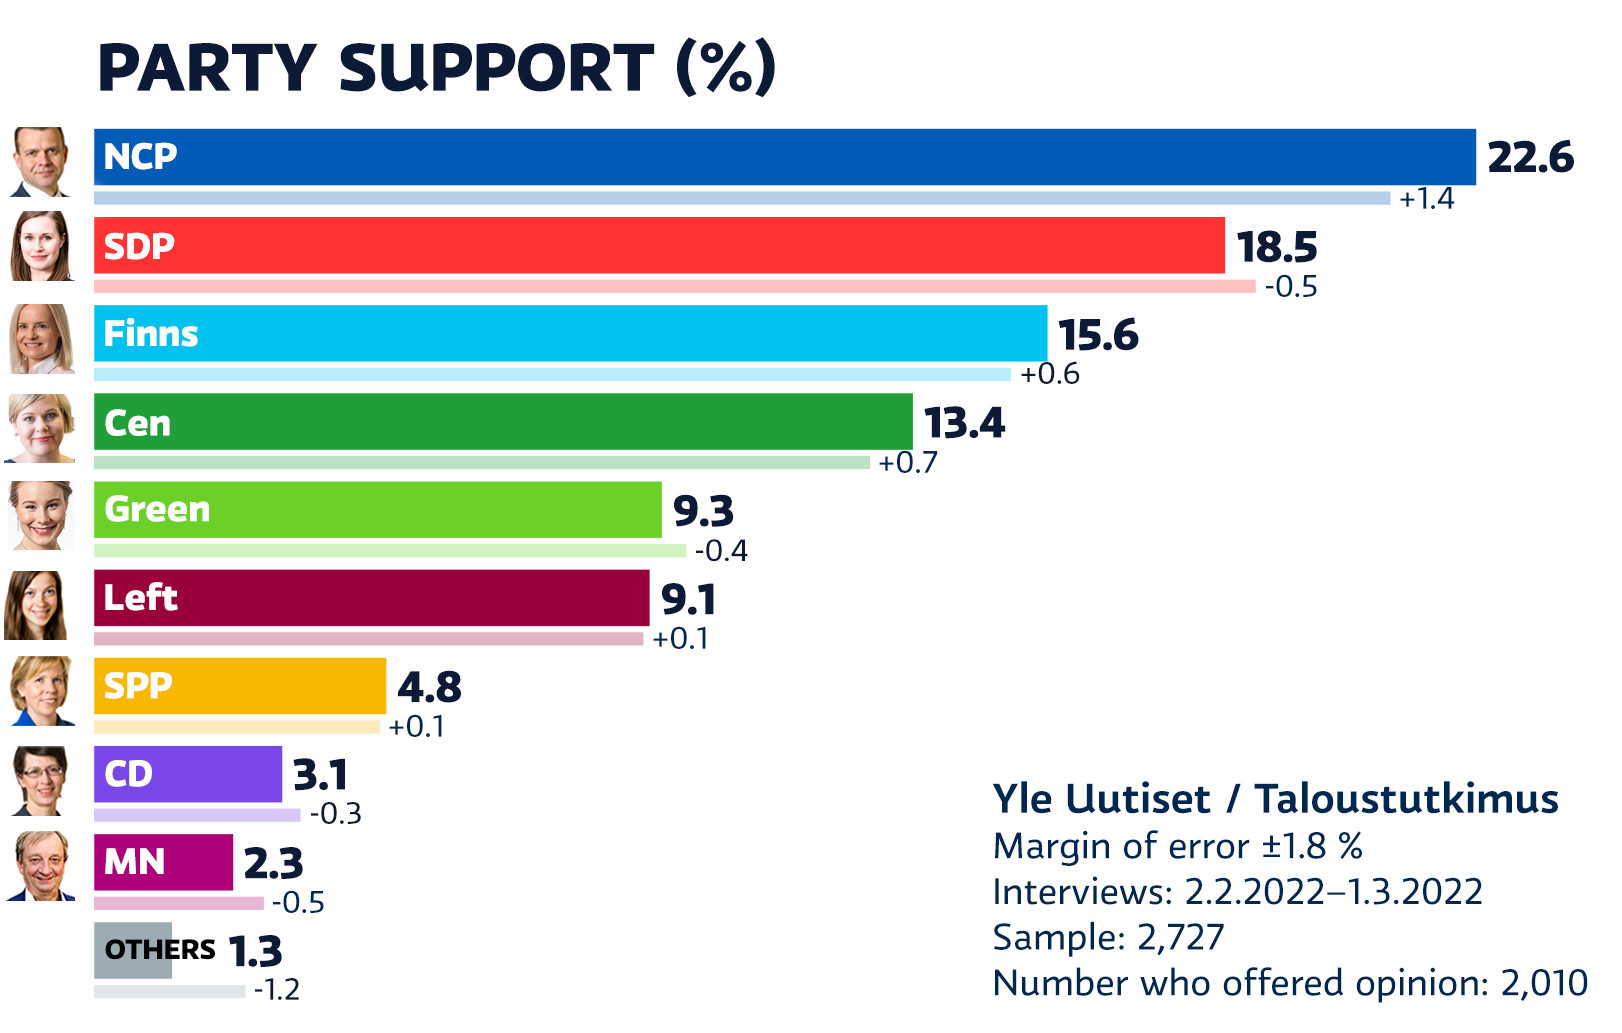 Ylen Gallup: NCP stretches lead over SDP, Greens’ support drops further